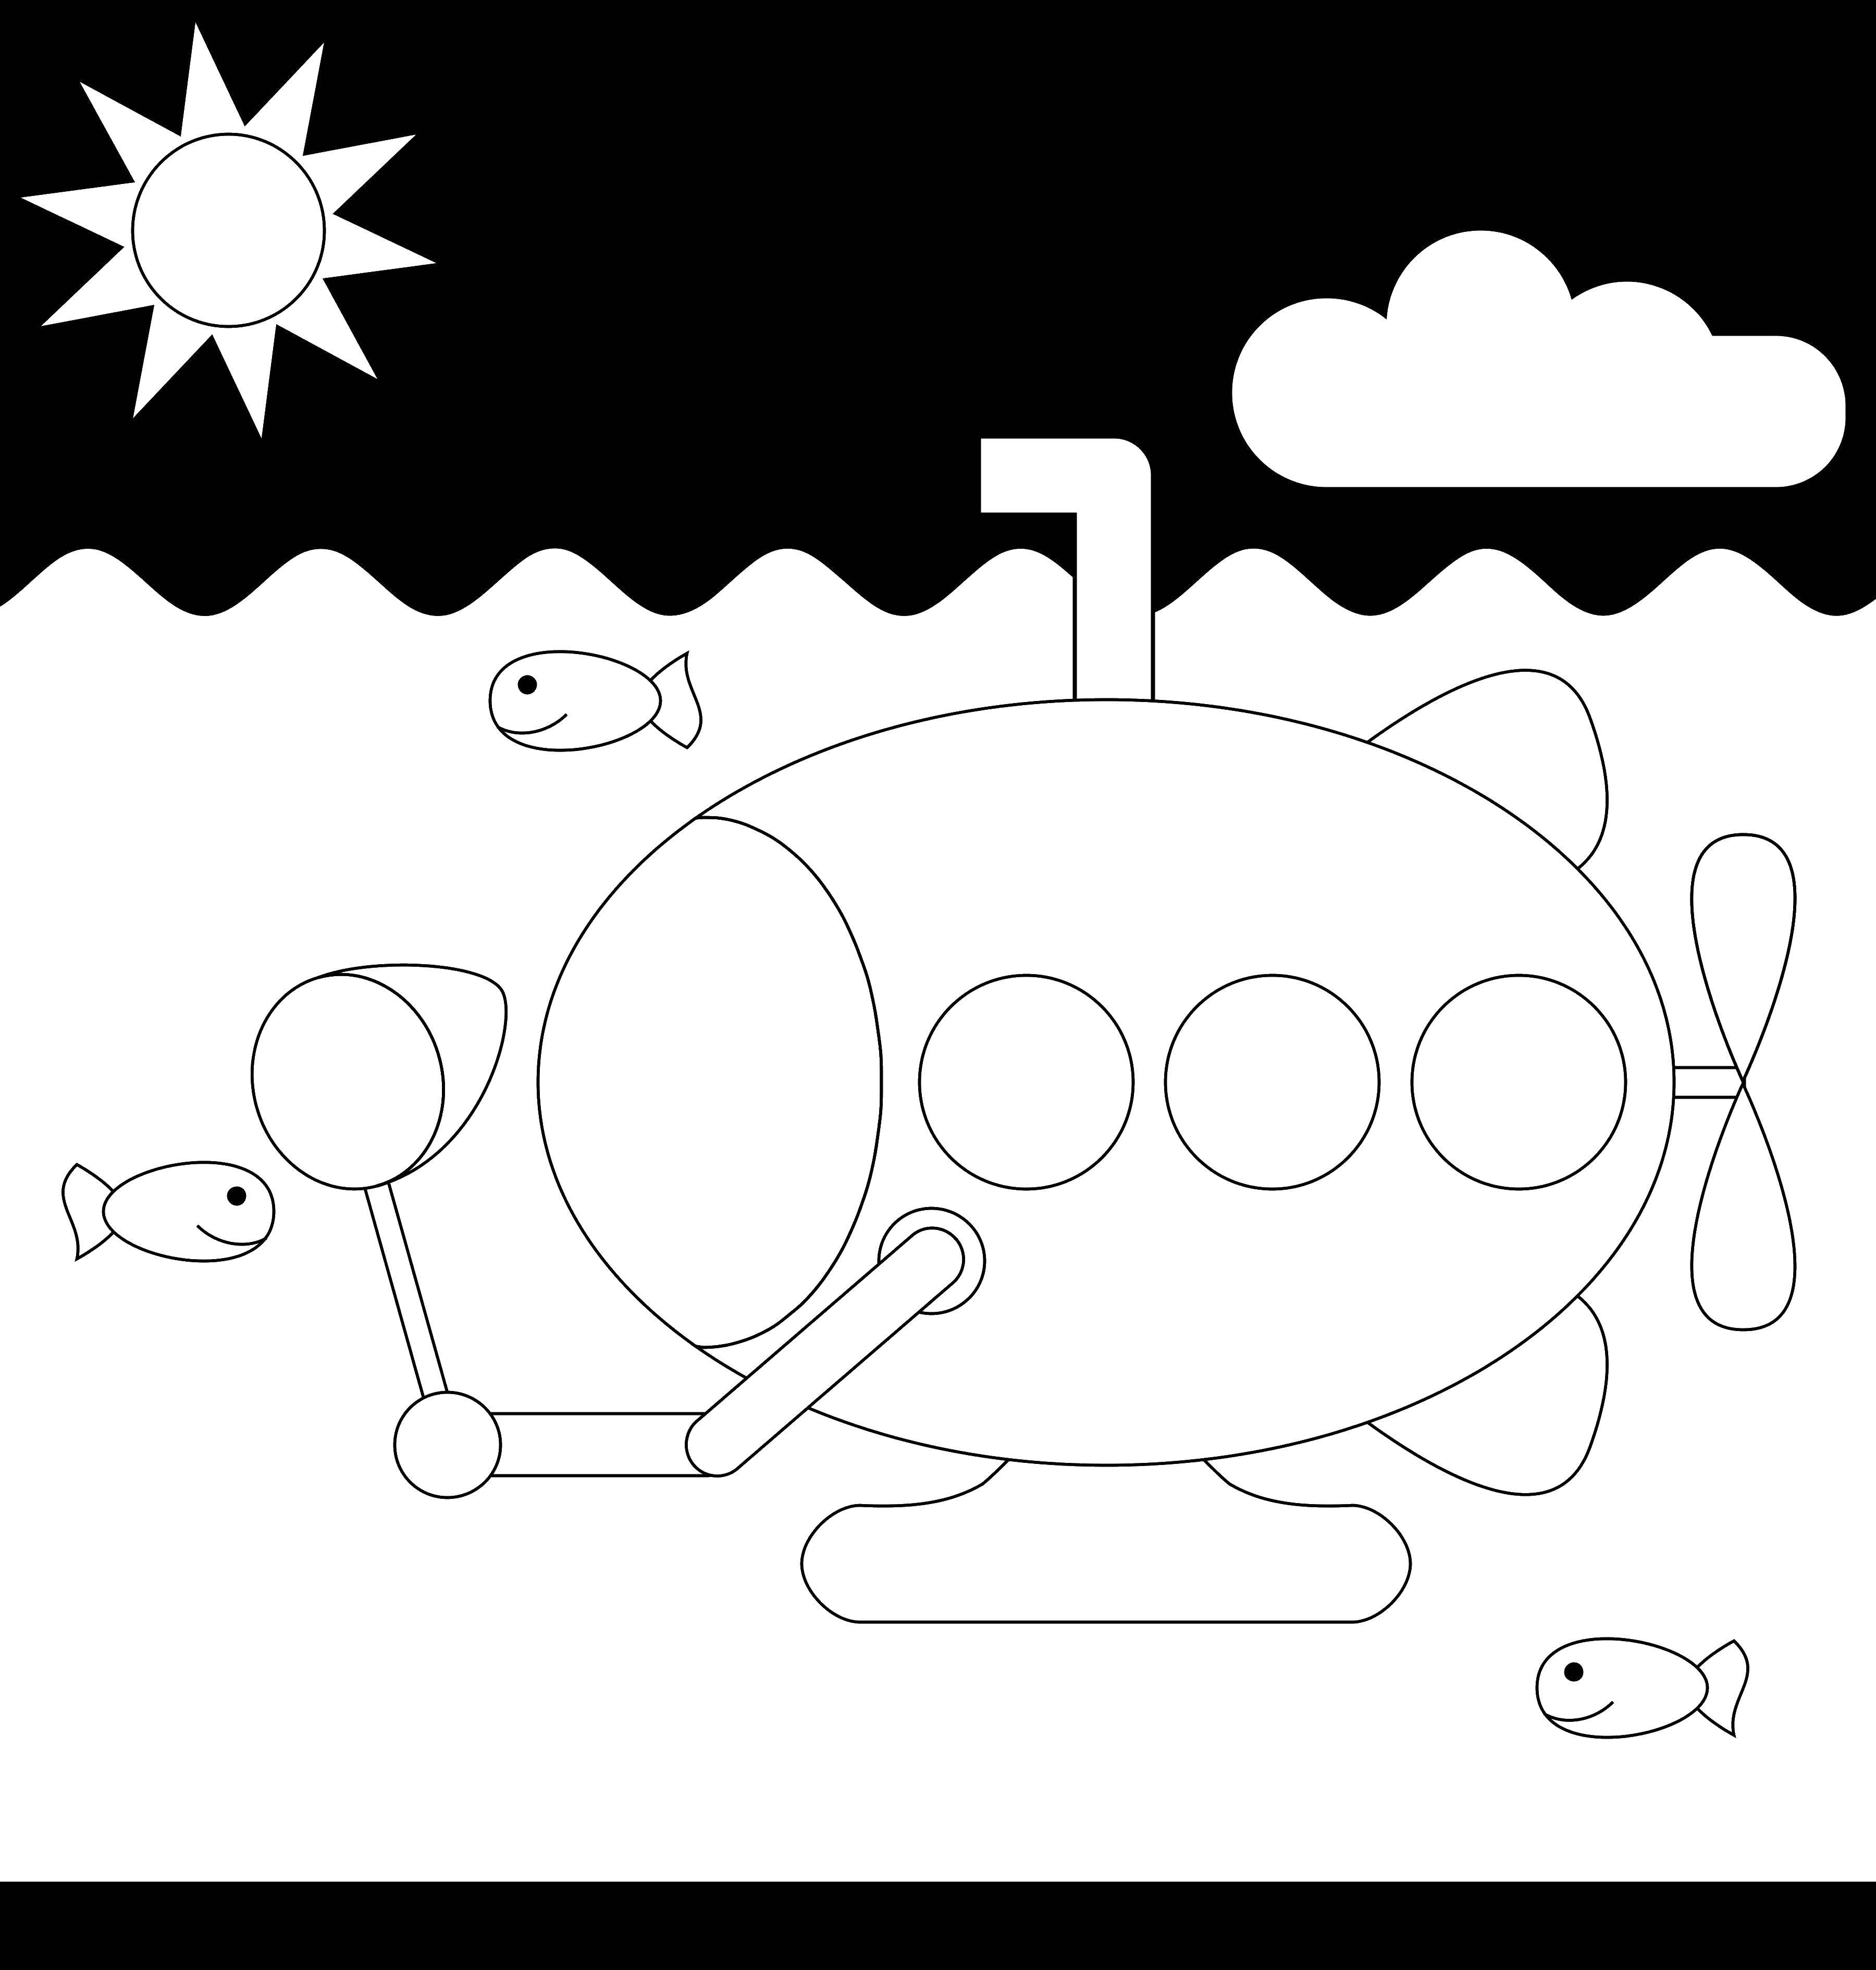 Coloring Submarine. Category submarine. Tags:  water, submarine, boat.